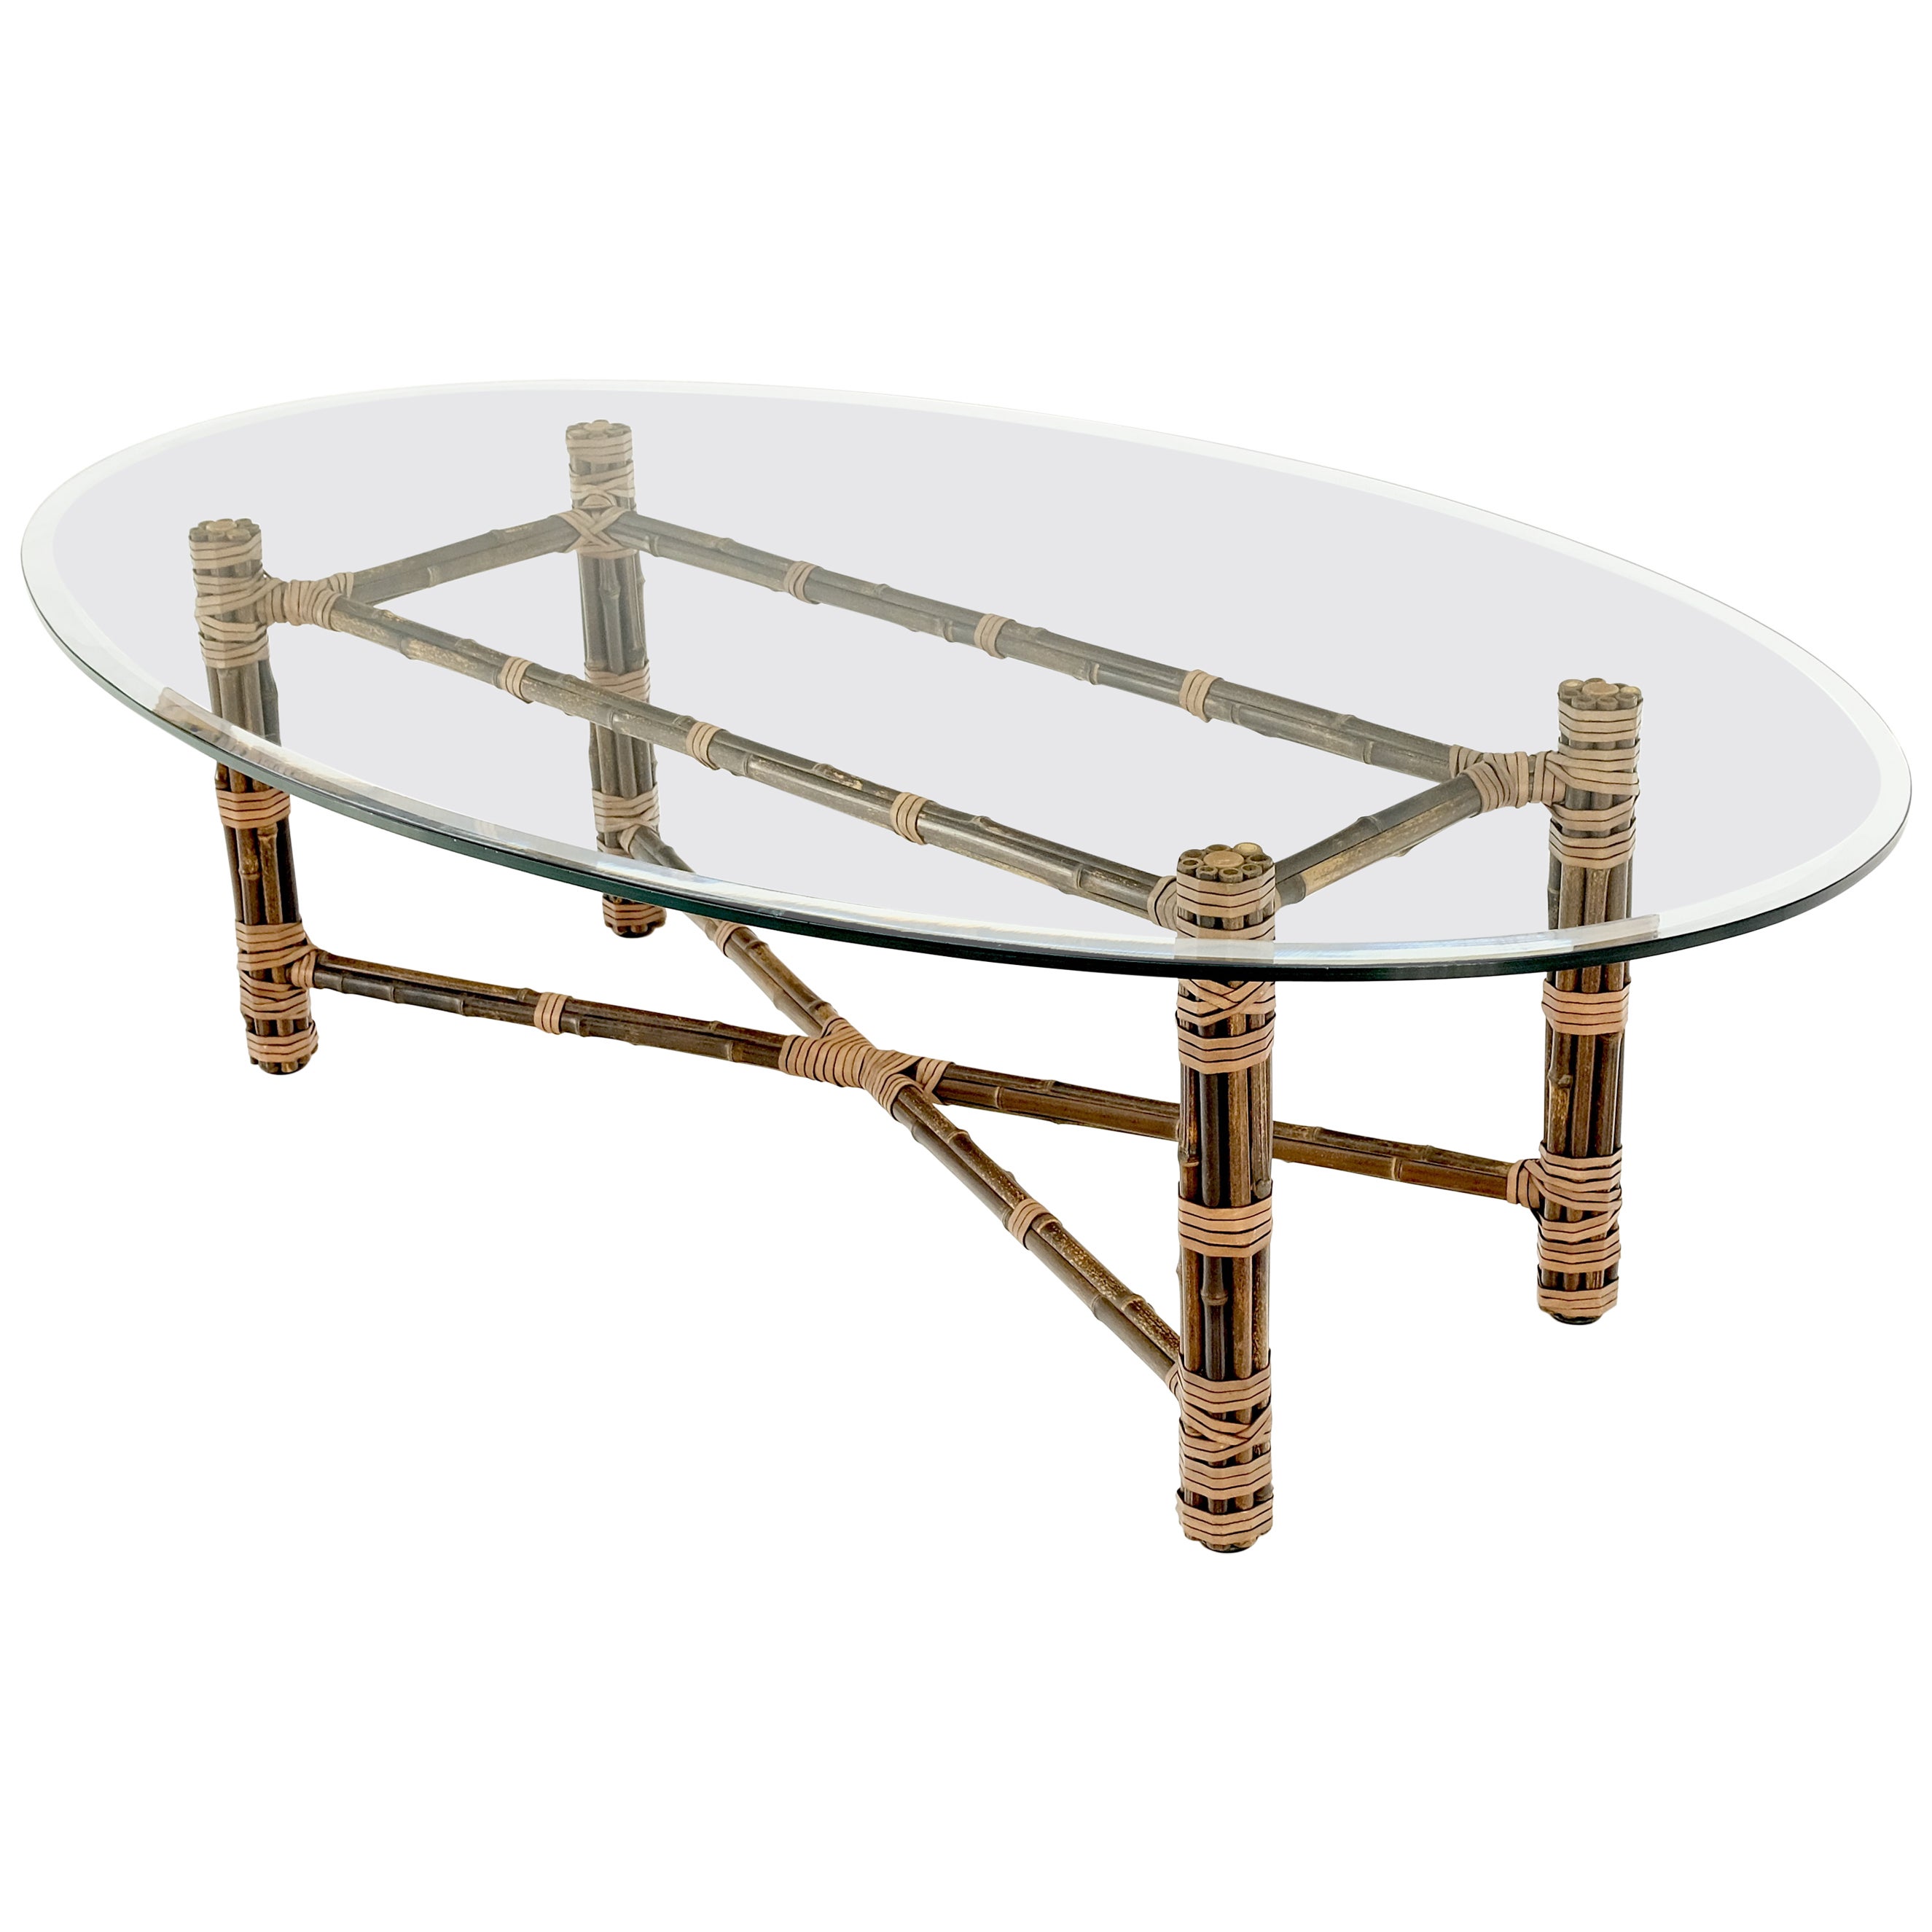 McGuire Oval Glass Top Bamboo & Leather Coffee Table MINT!